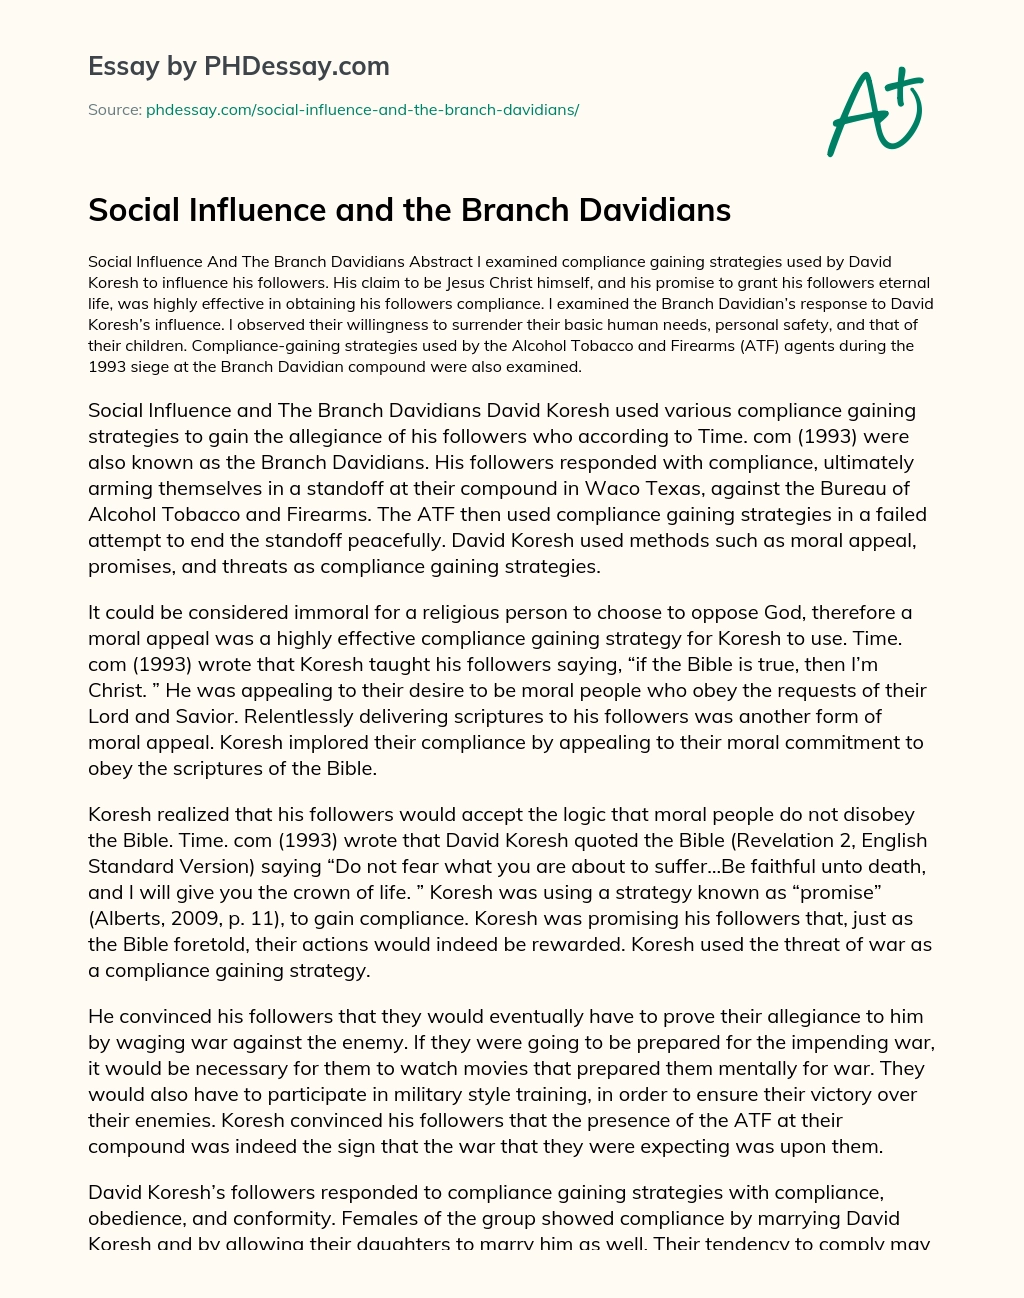 Social Influence and the Branch Davidians essay